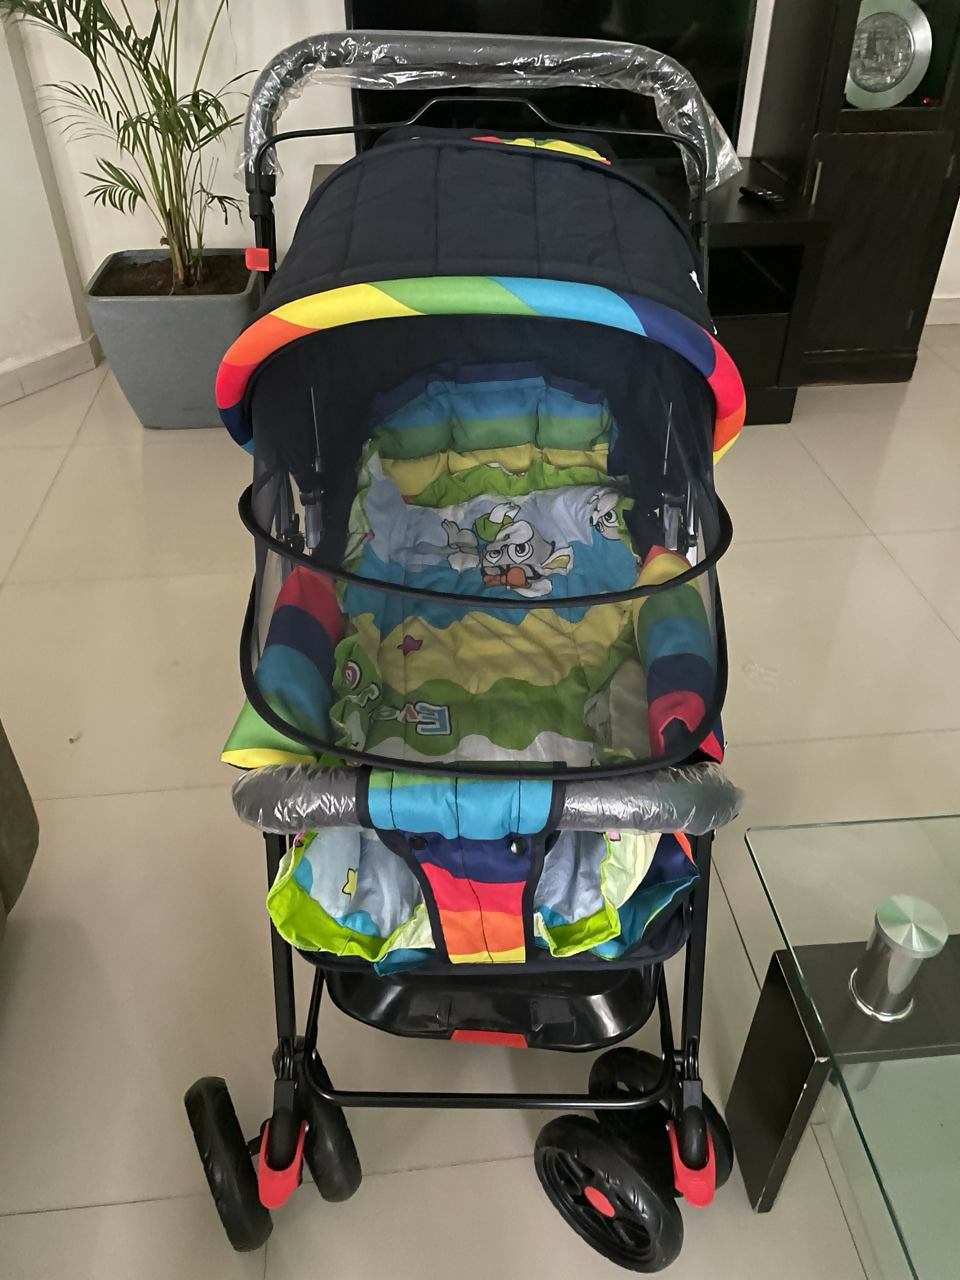 Explore the STAR AND DAISY Stroller/Pram for Baby – stylish, comfortable, and functional with multi-position reclining seat and one-hand fold for effortless outings.